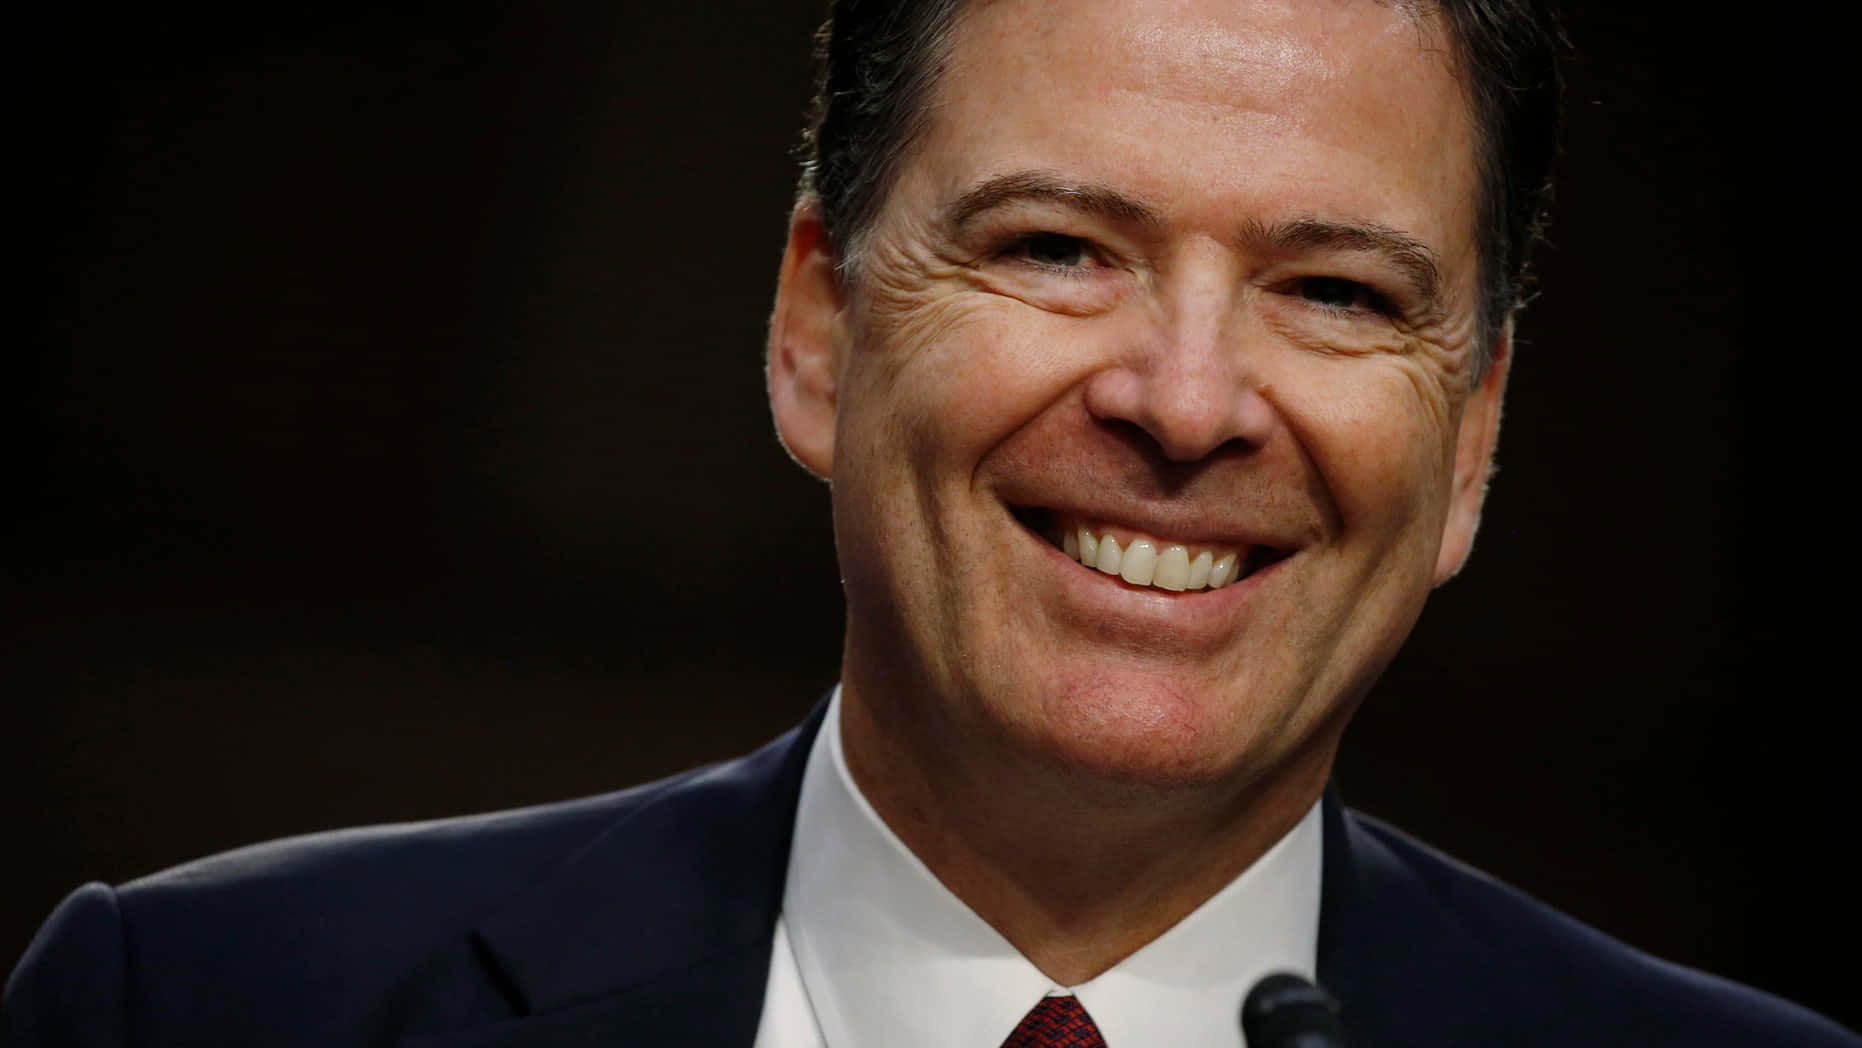 James Comey Smiling During Event Wallpaper